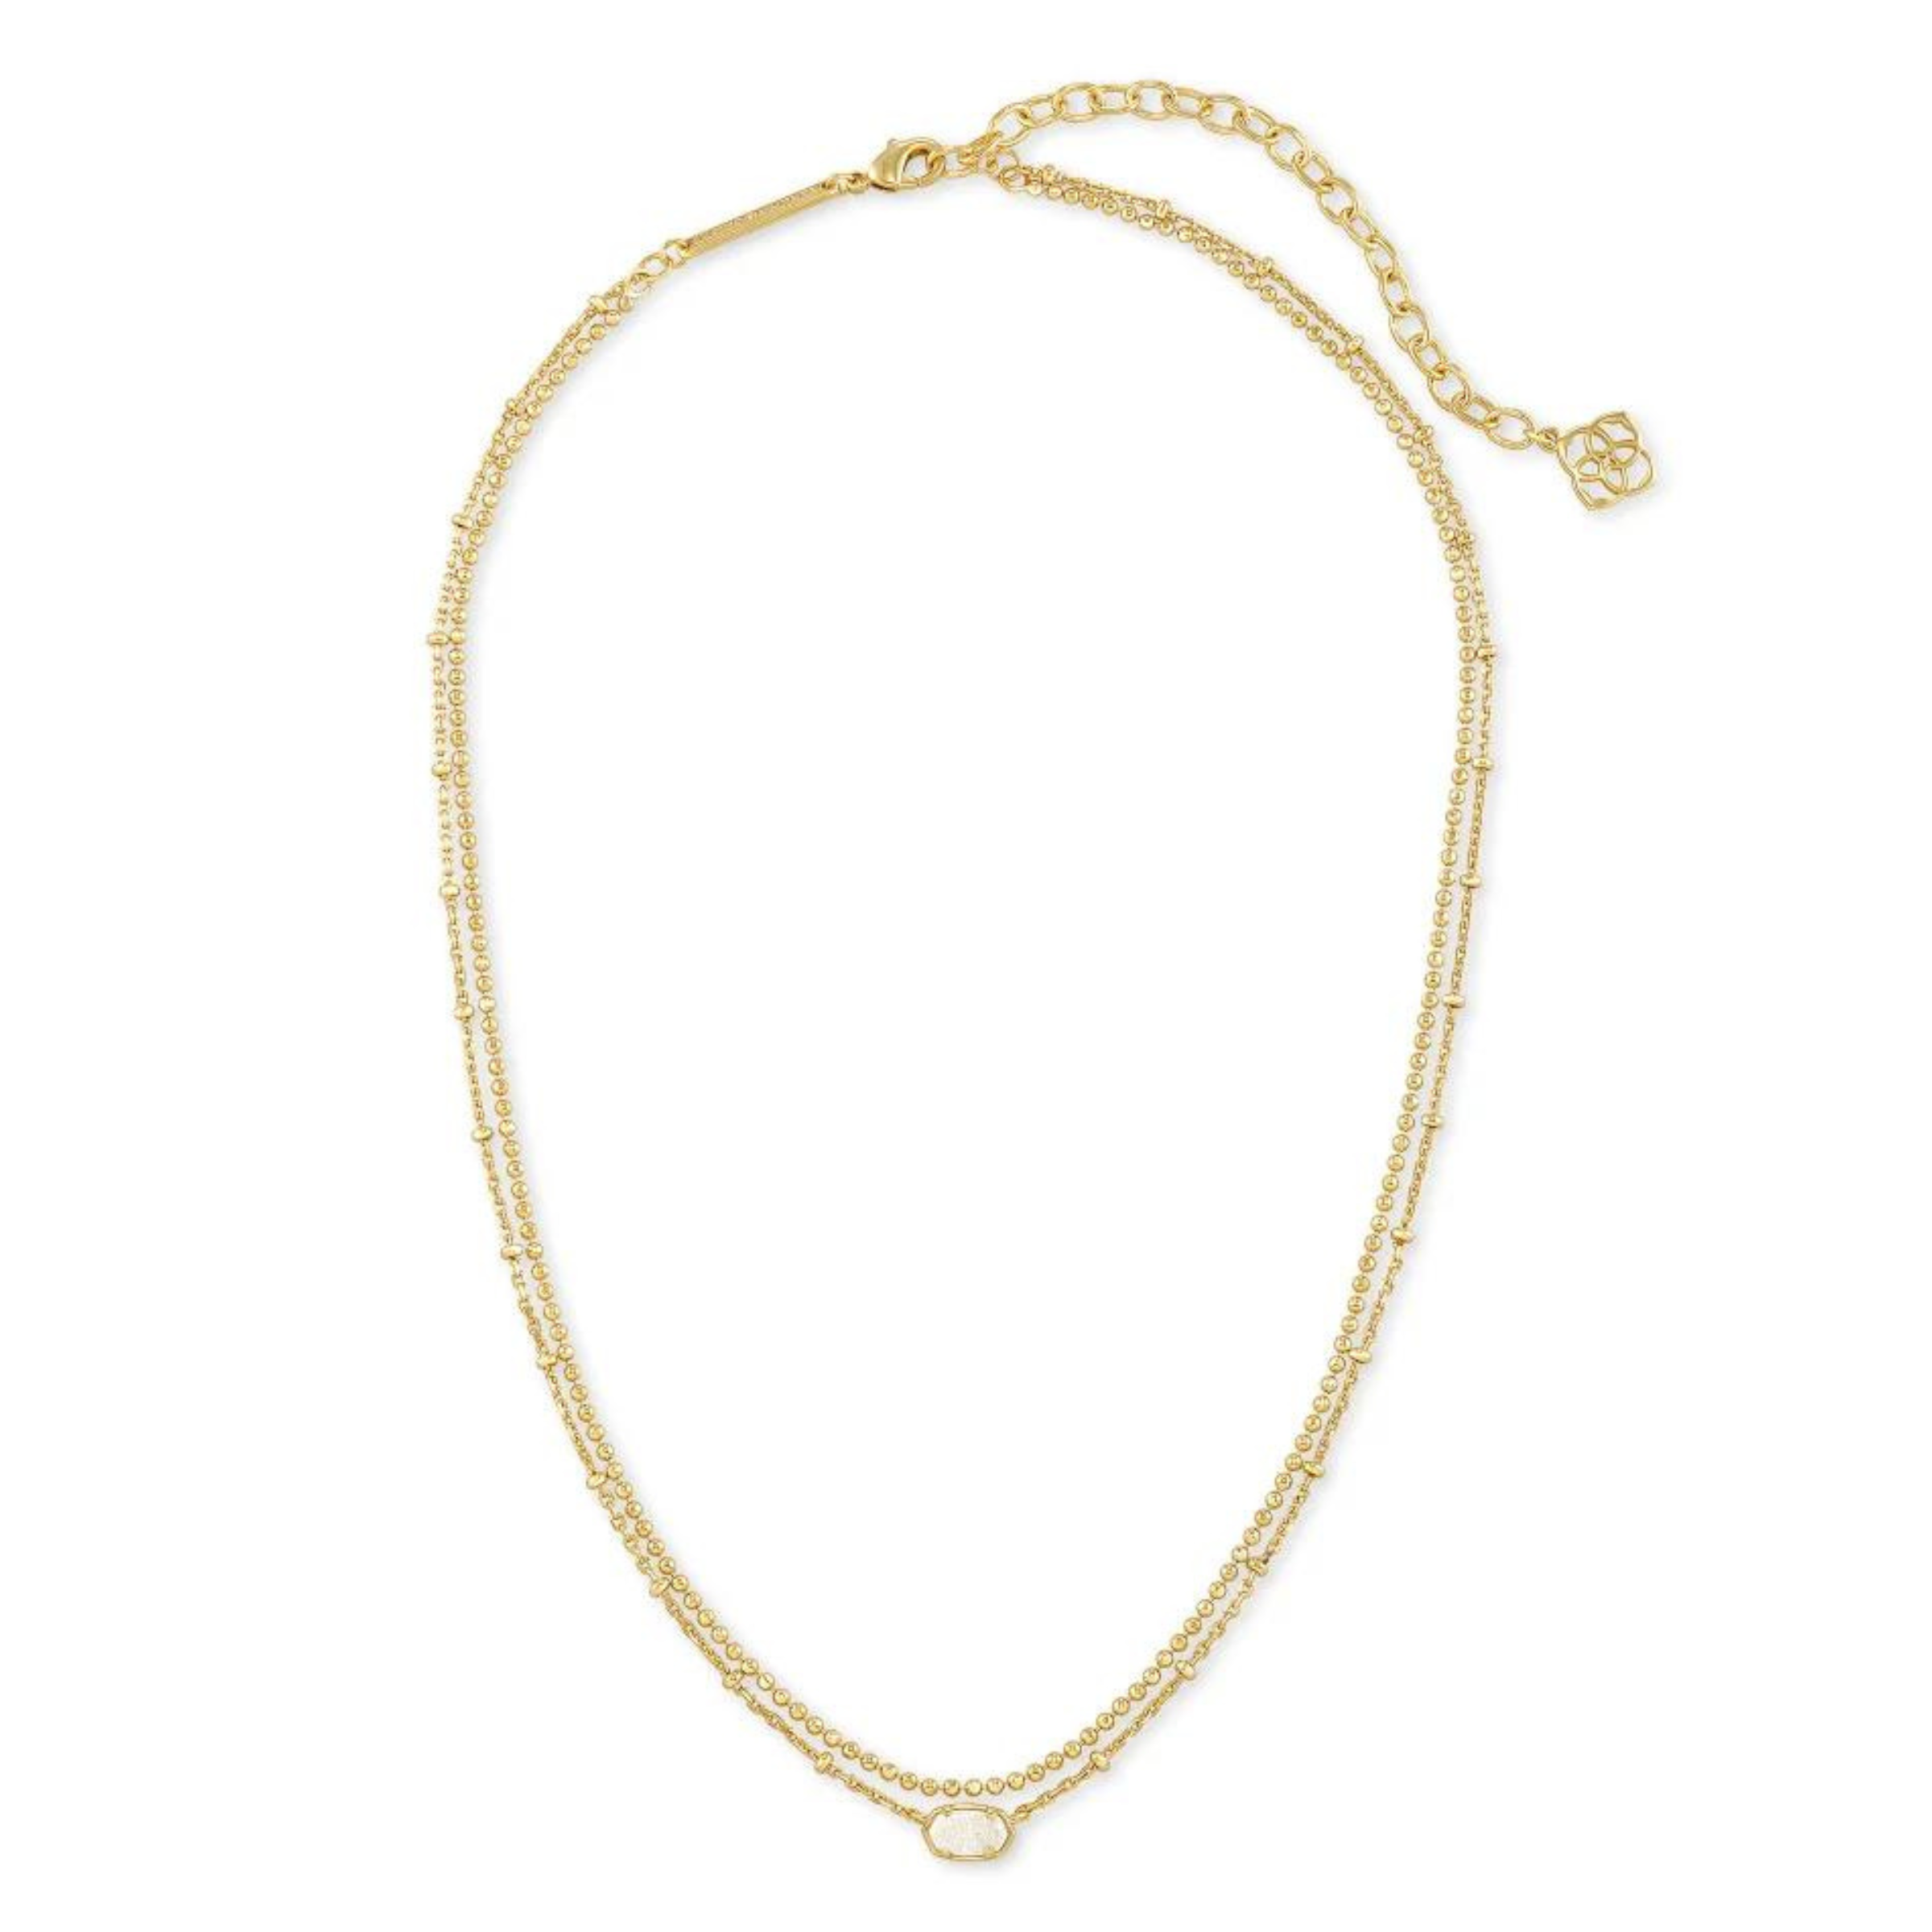 Kendra Scott | Emilie Gold Multi Strand Necklace in Iridescent Drusy - Giddy Up Glamour Boutique